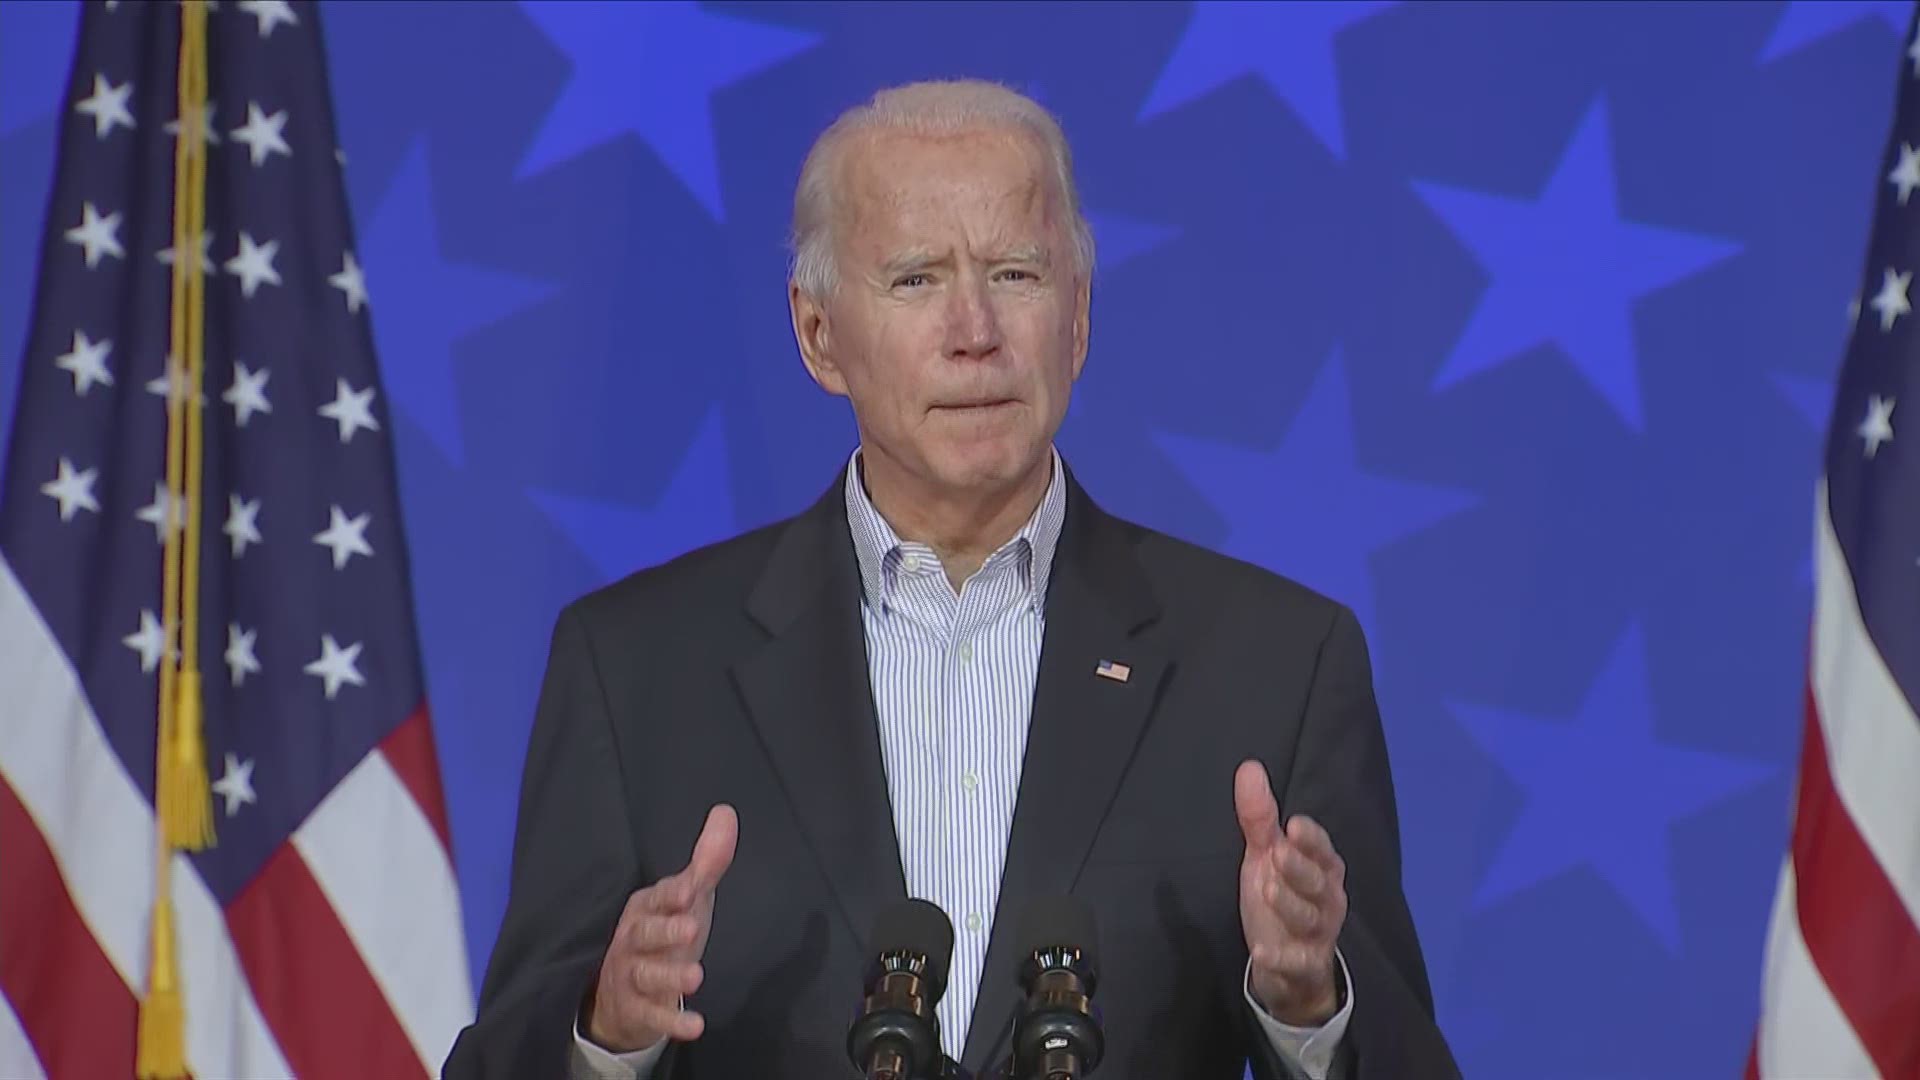 During a brief statement Thursday, Democratic presidential nominee Joe Biden urged everyone to stay calm as key battleground states press forward with vote counting.